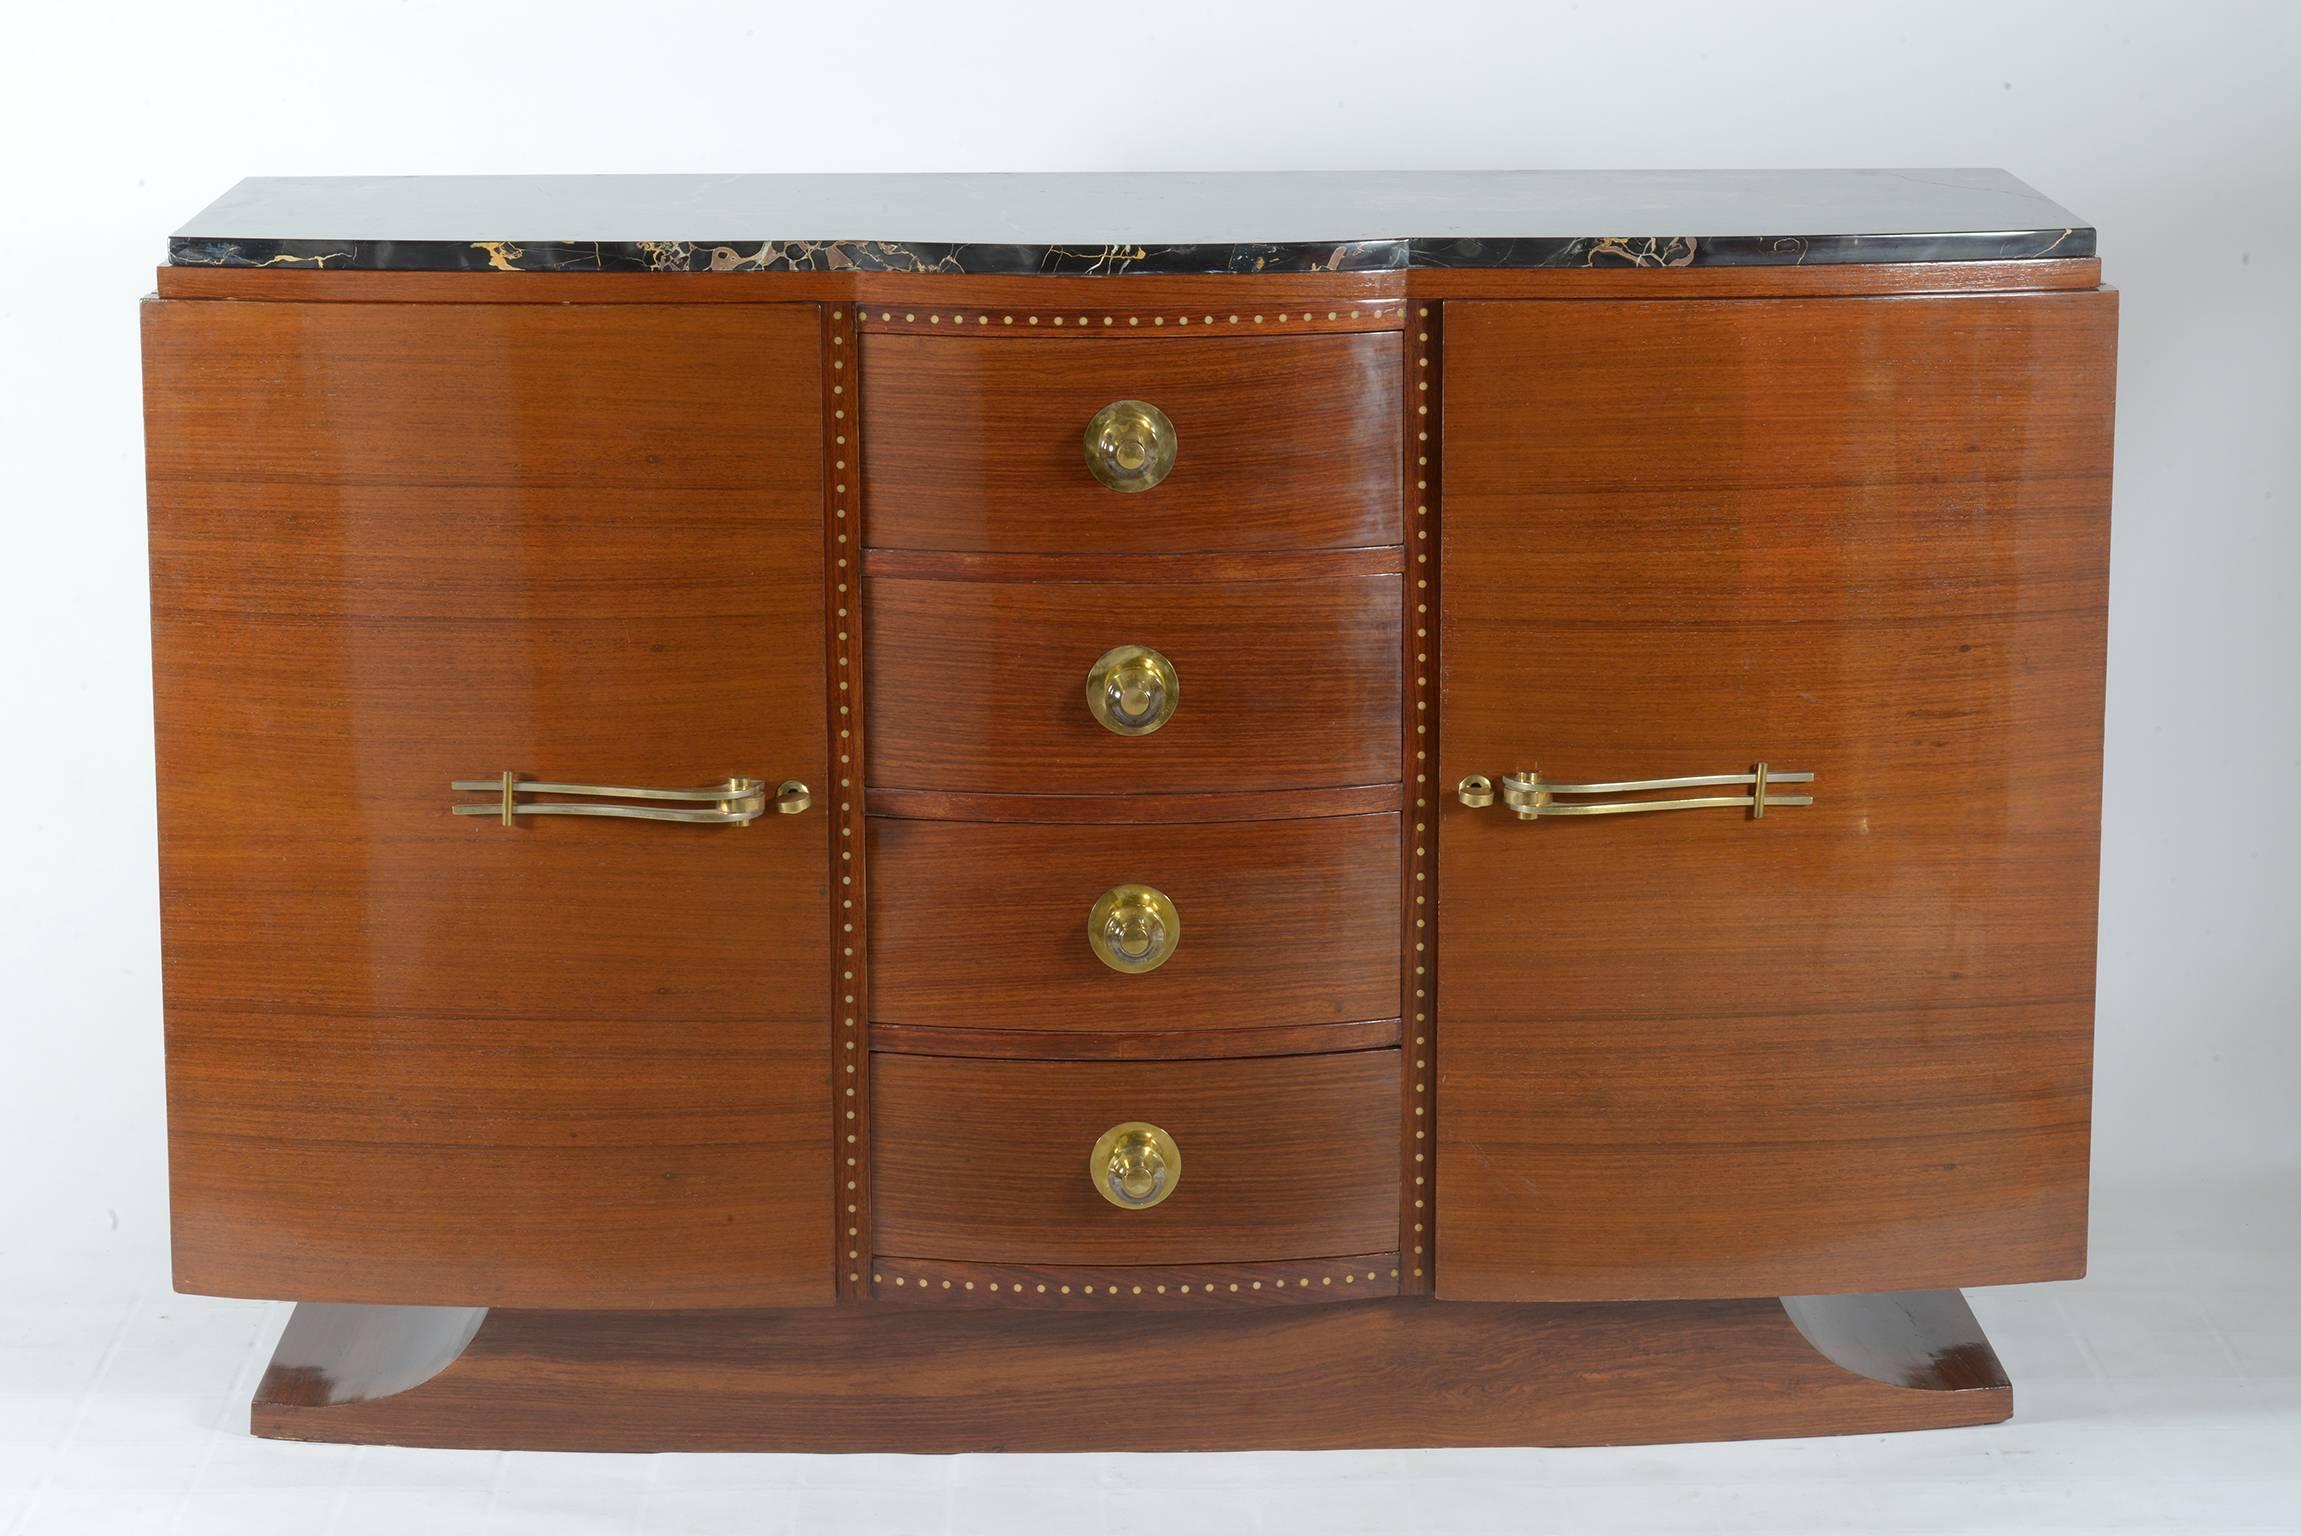 Two front curved doors and four curved drawers in precious exotic wood.
Crystal sphere handles on the drawers and brass handles and keys for the side doors.
Inlaid white bakelite decoration around the drawers.
Portoro marble top and moustache shaped